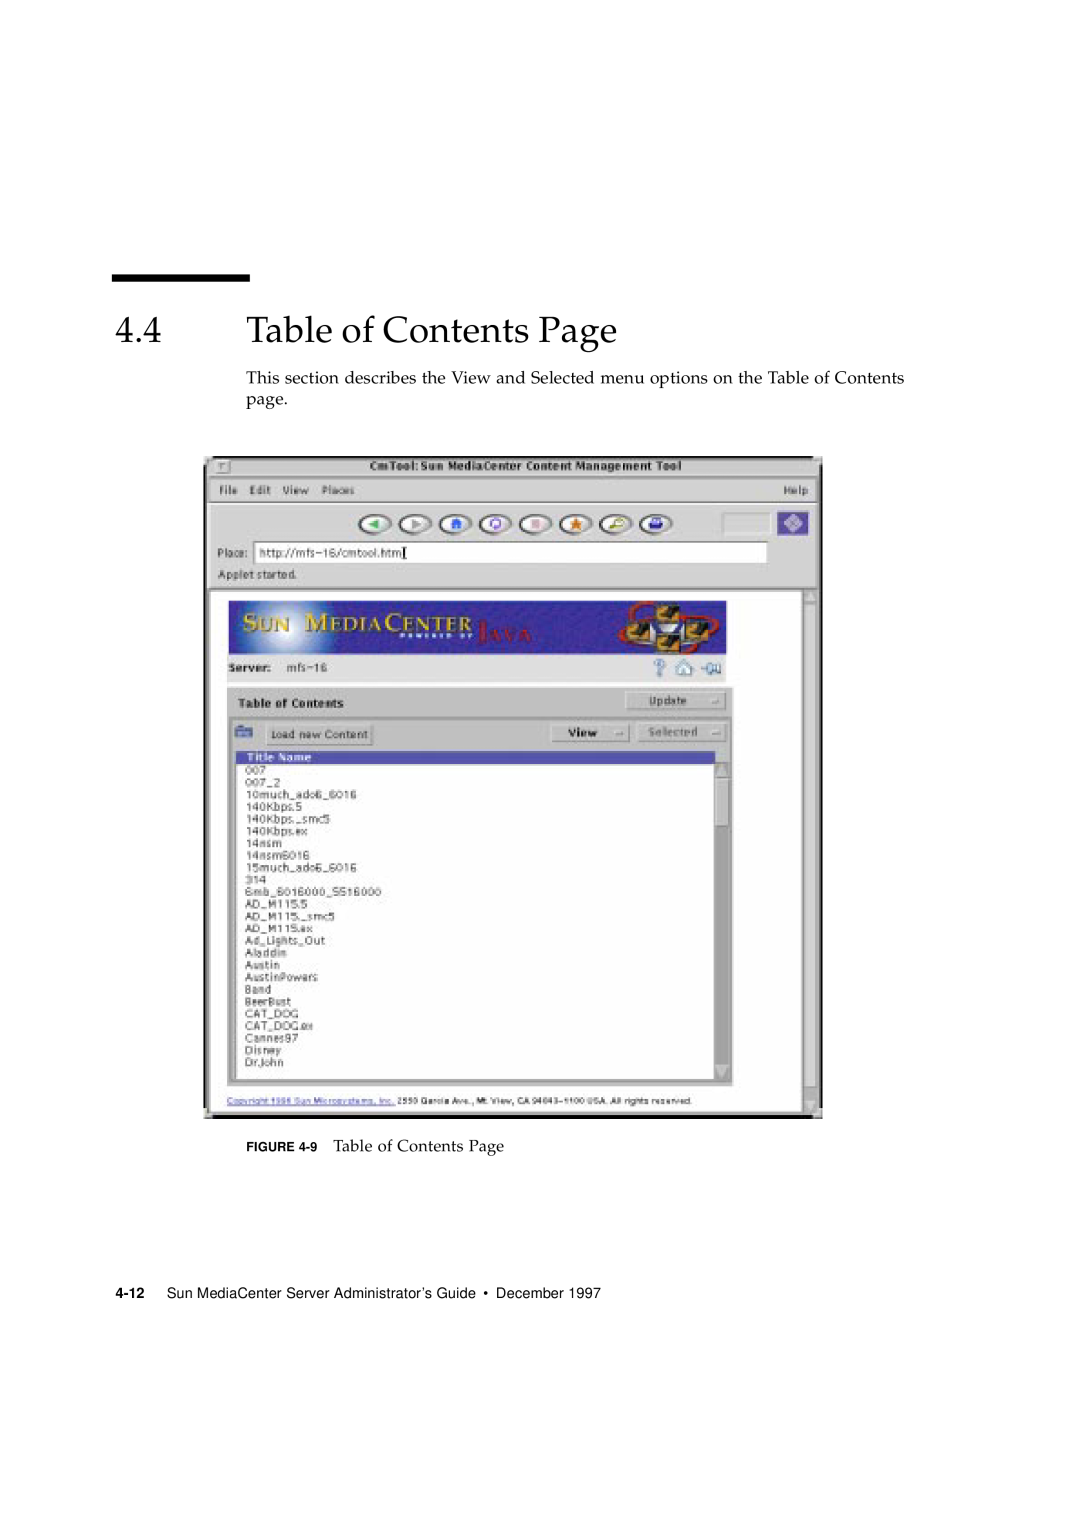 Sun Microsystems 2.1 manual 9 Table of Contents Page, Sun MediaCenter Server Administrator’s Guide December 